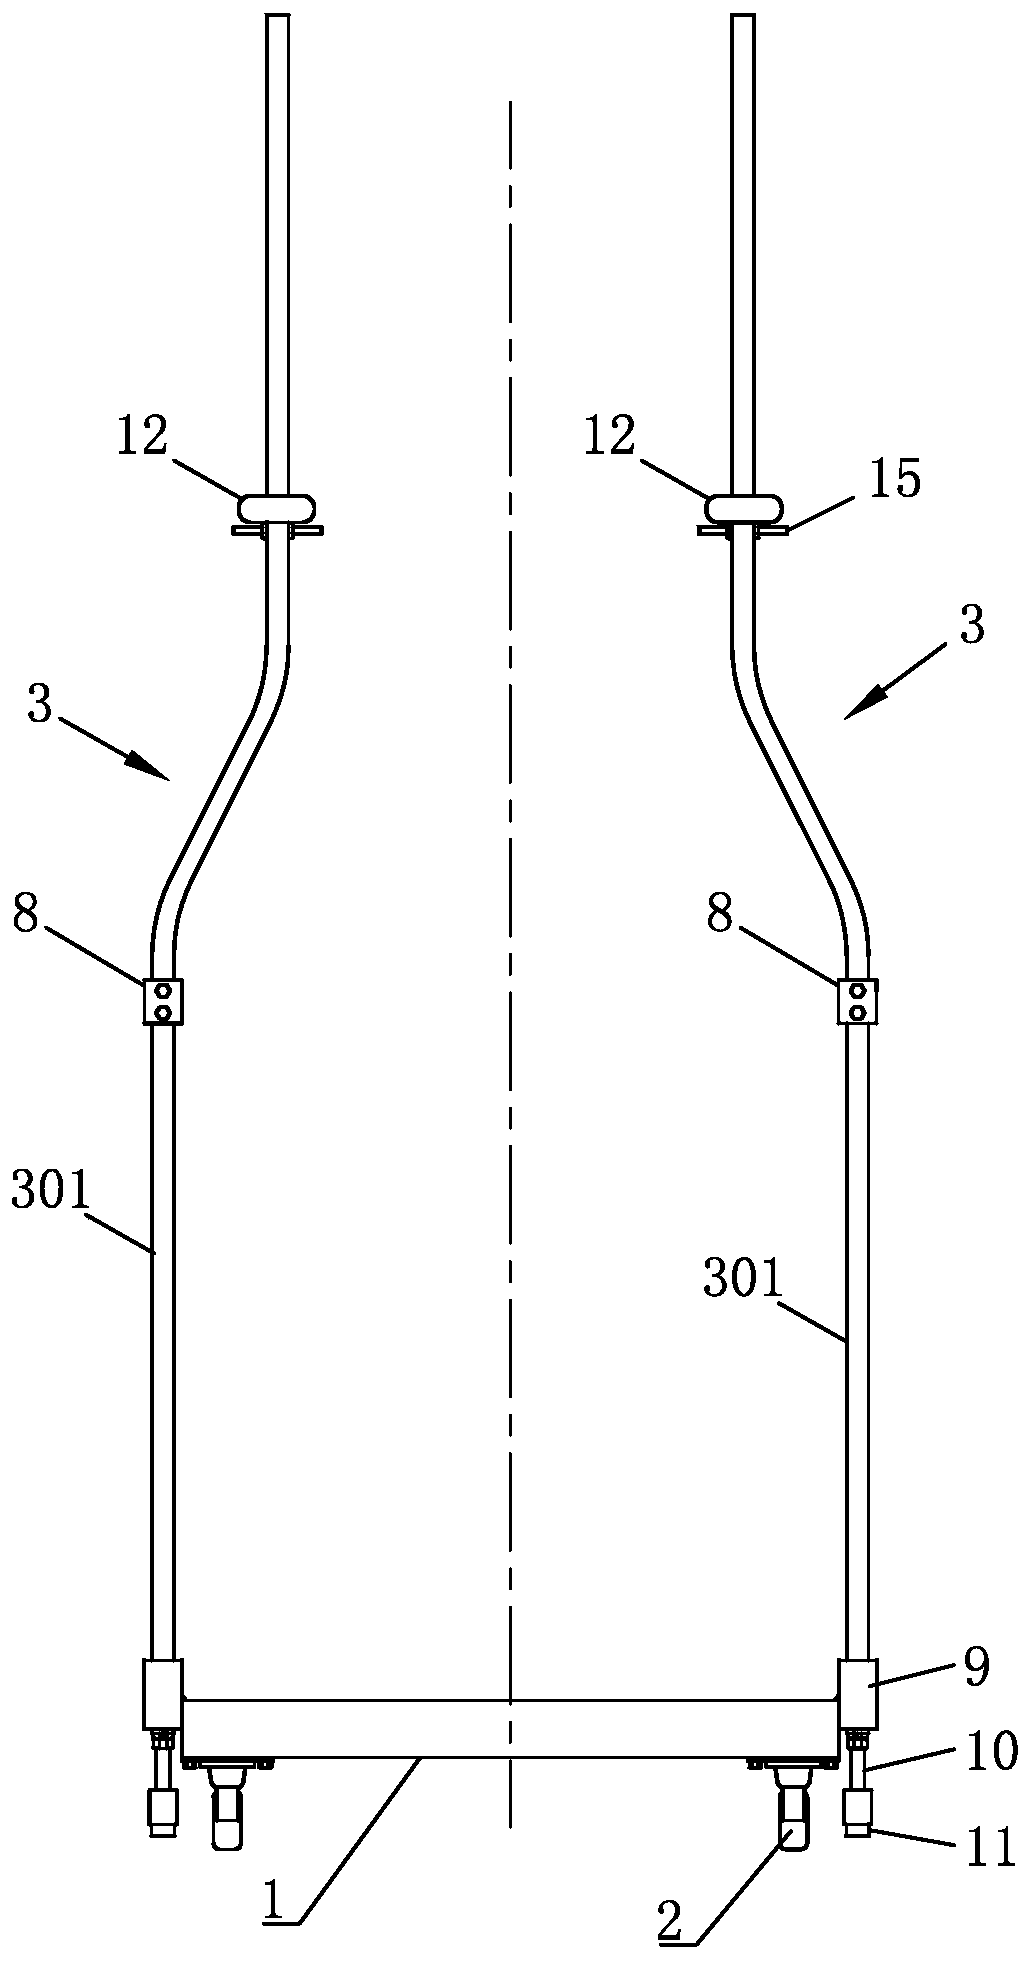 Walking auxiliary device